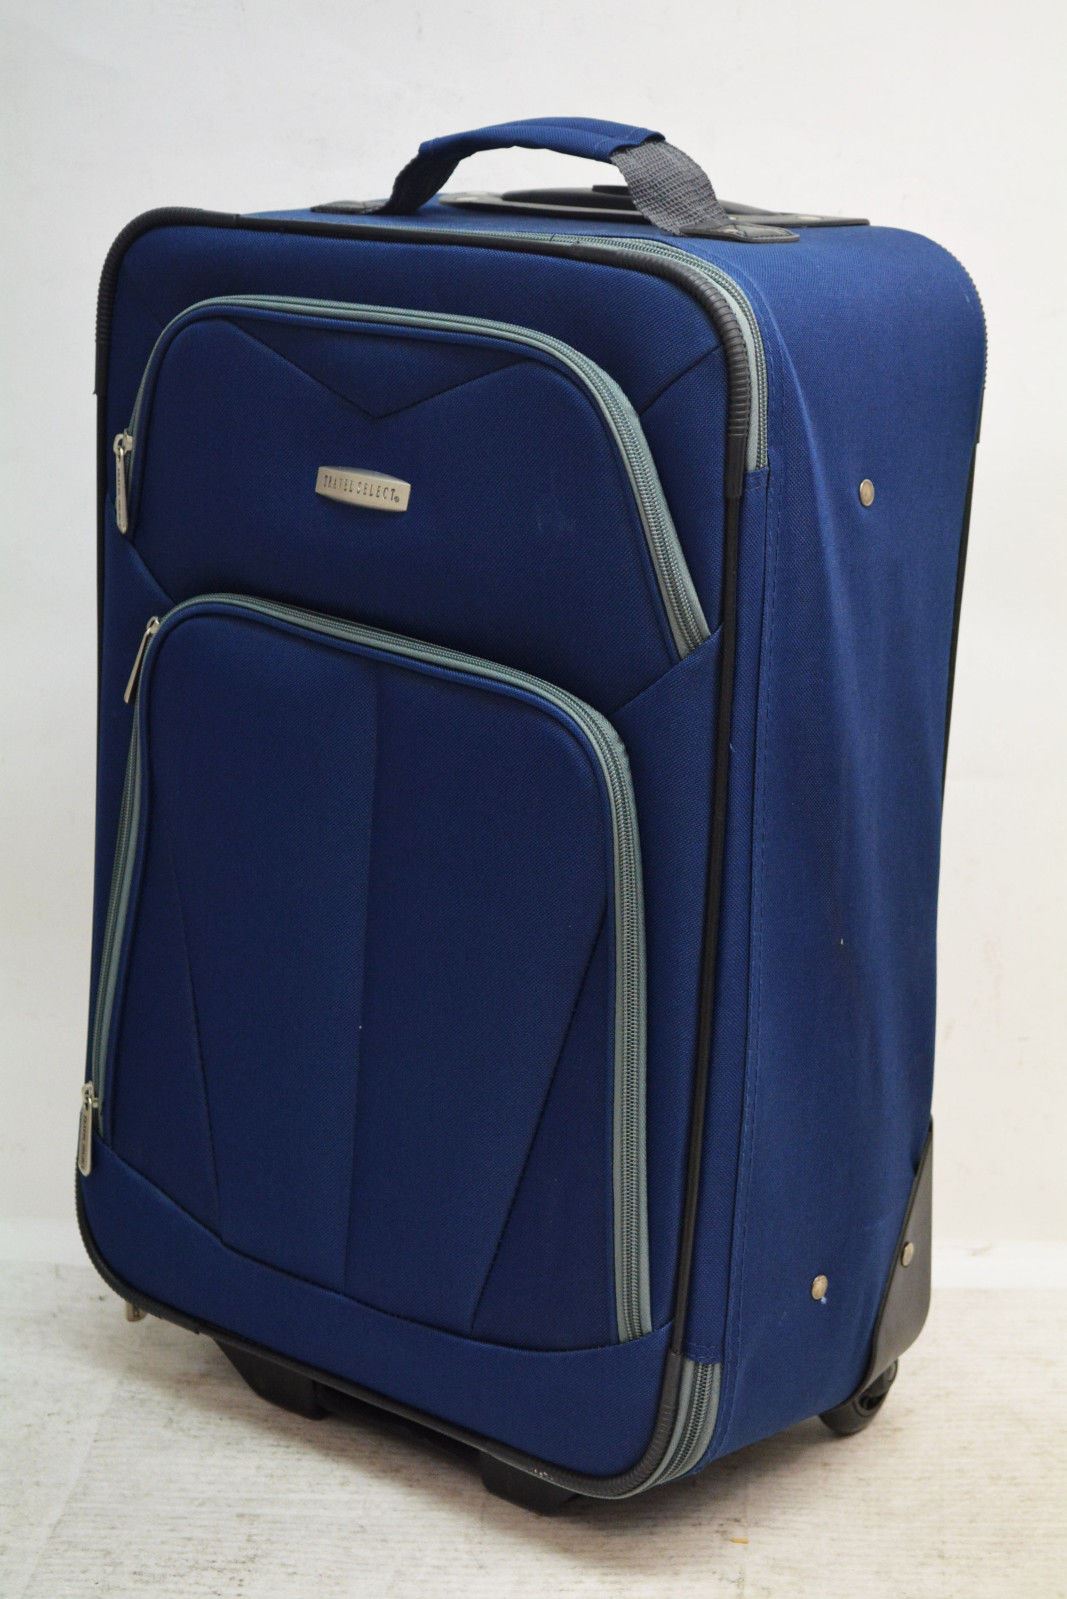 $280 NEW Travel Select Kingsway 20'' Rolling Wheel Suitcase Luggage Carry On